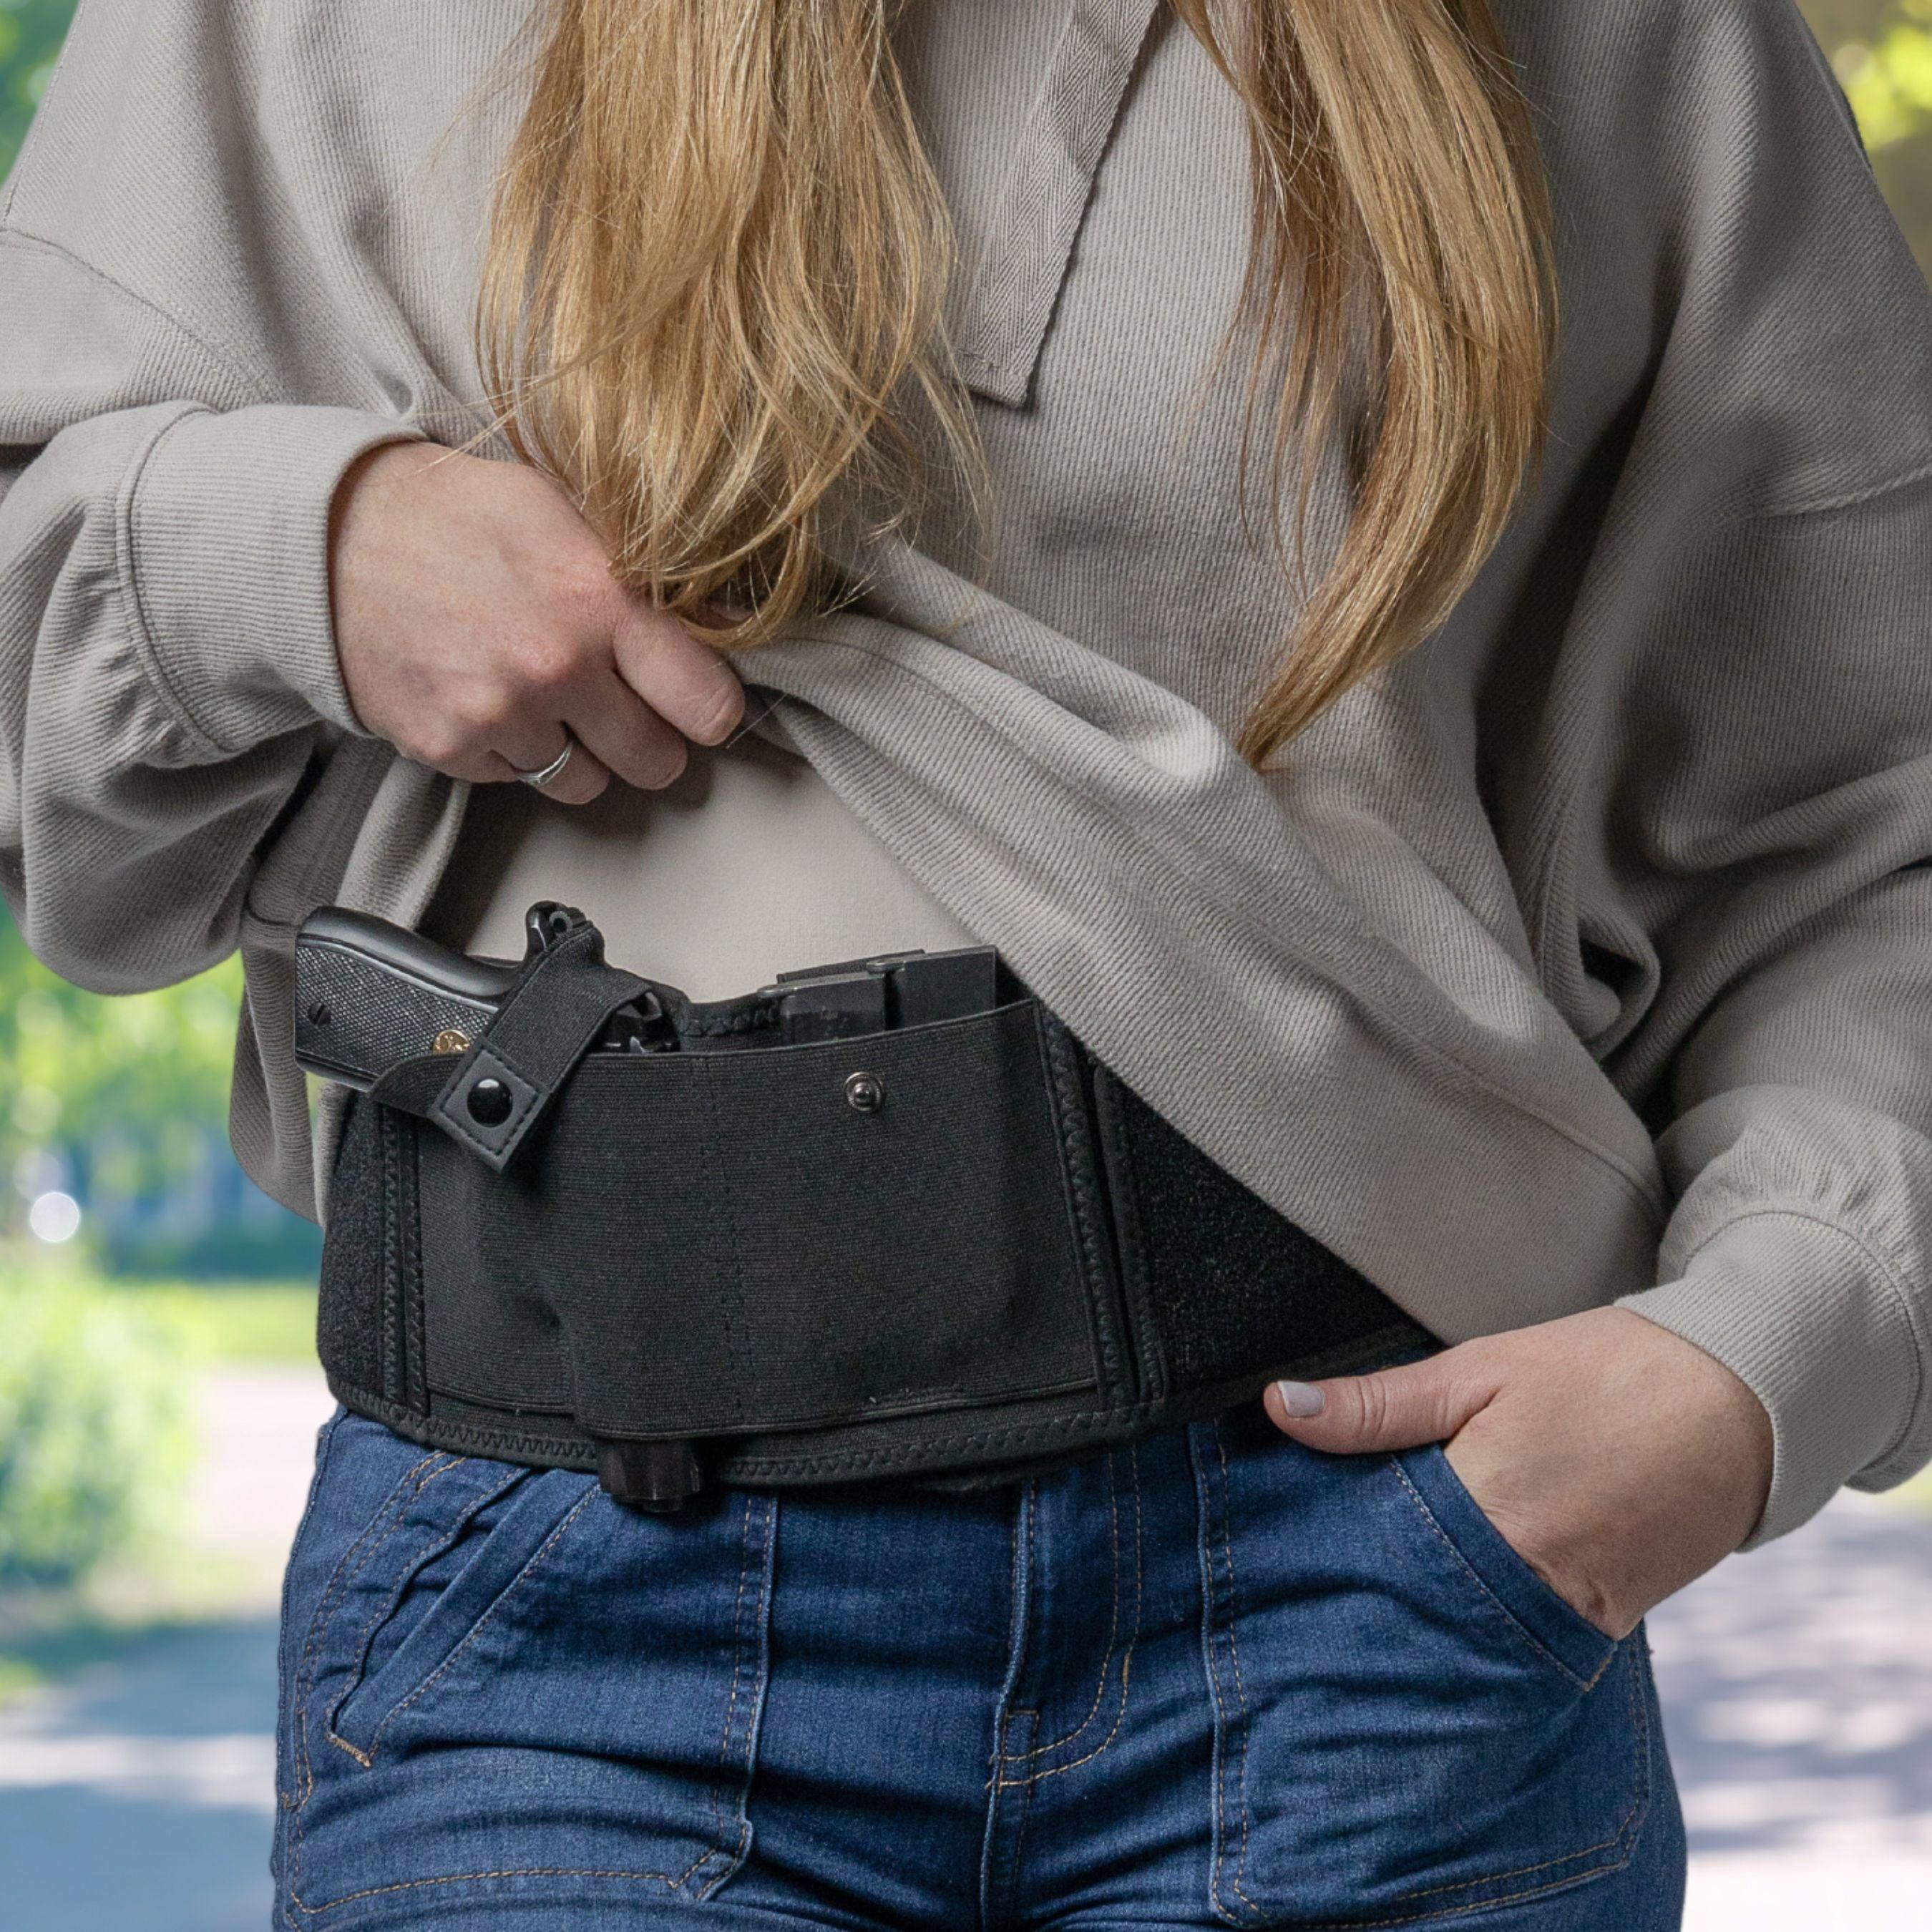  Women's Concealed Carry Belly Band Holster (Fits  Compact-Full)